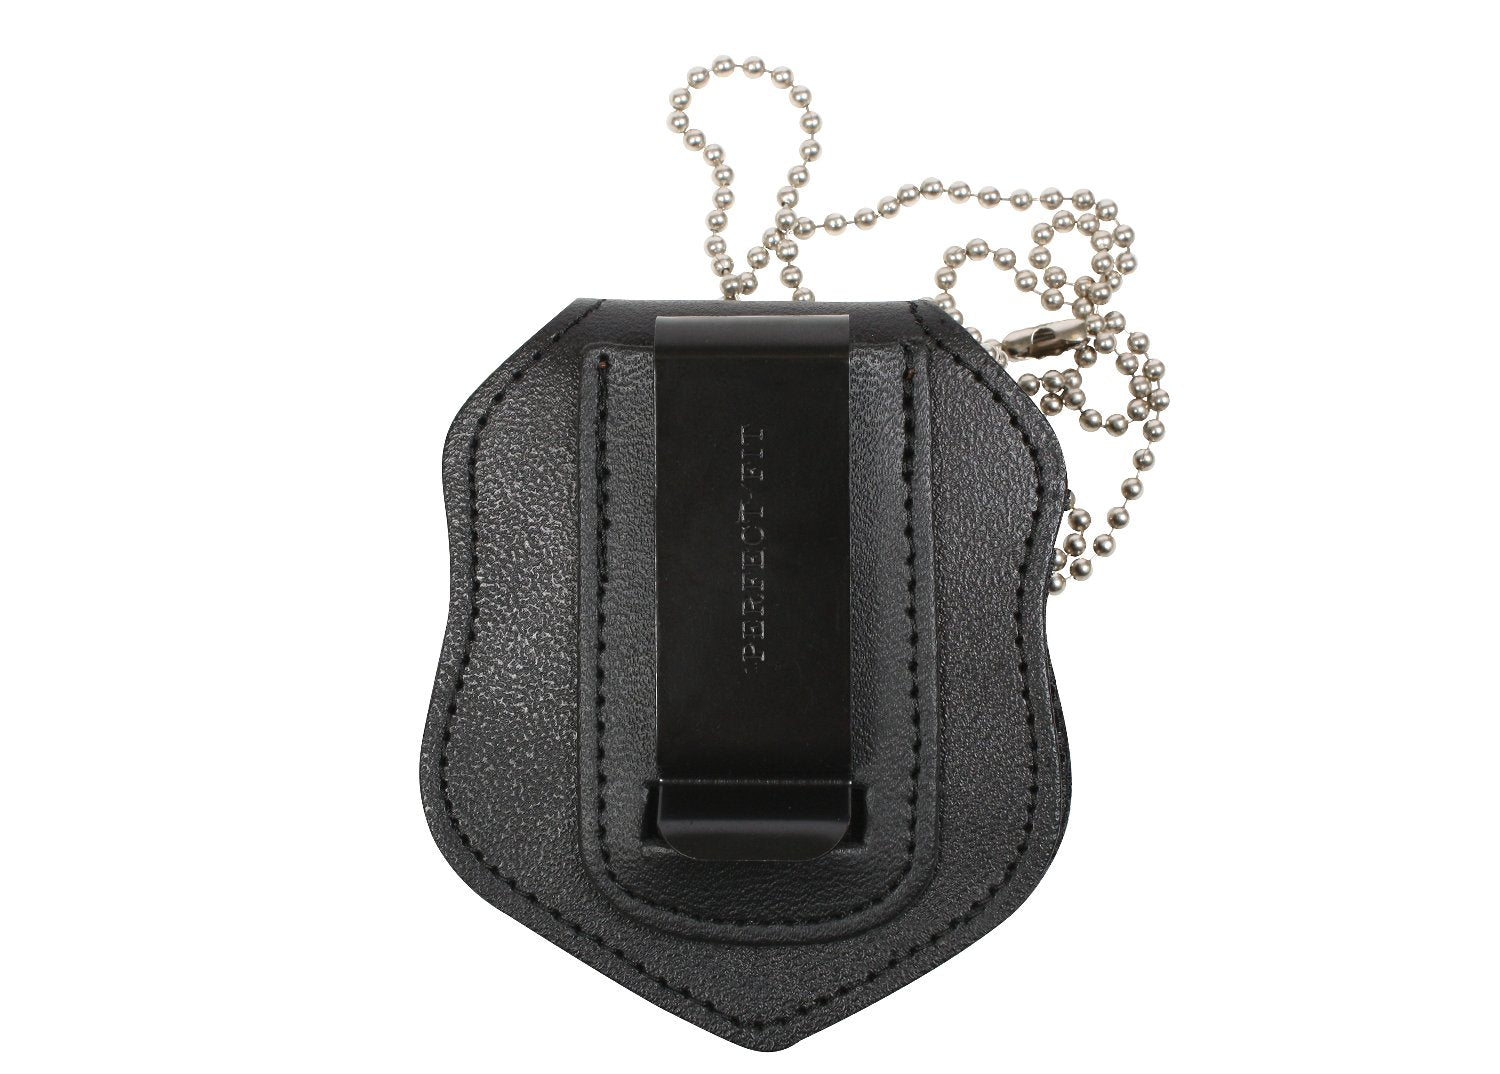 NYPD Style Leather Badge Holder w/ Clip